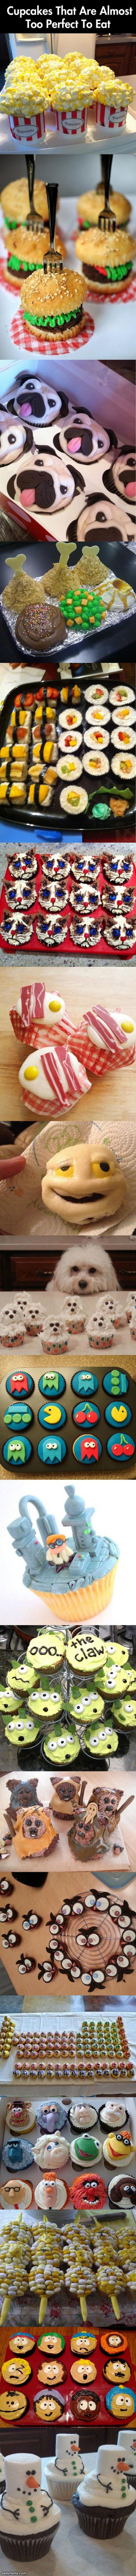 some cool cupcakes funny picture